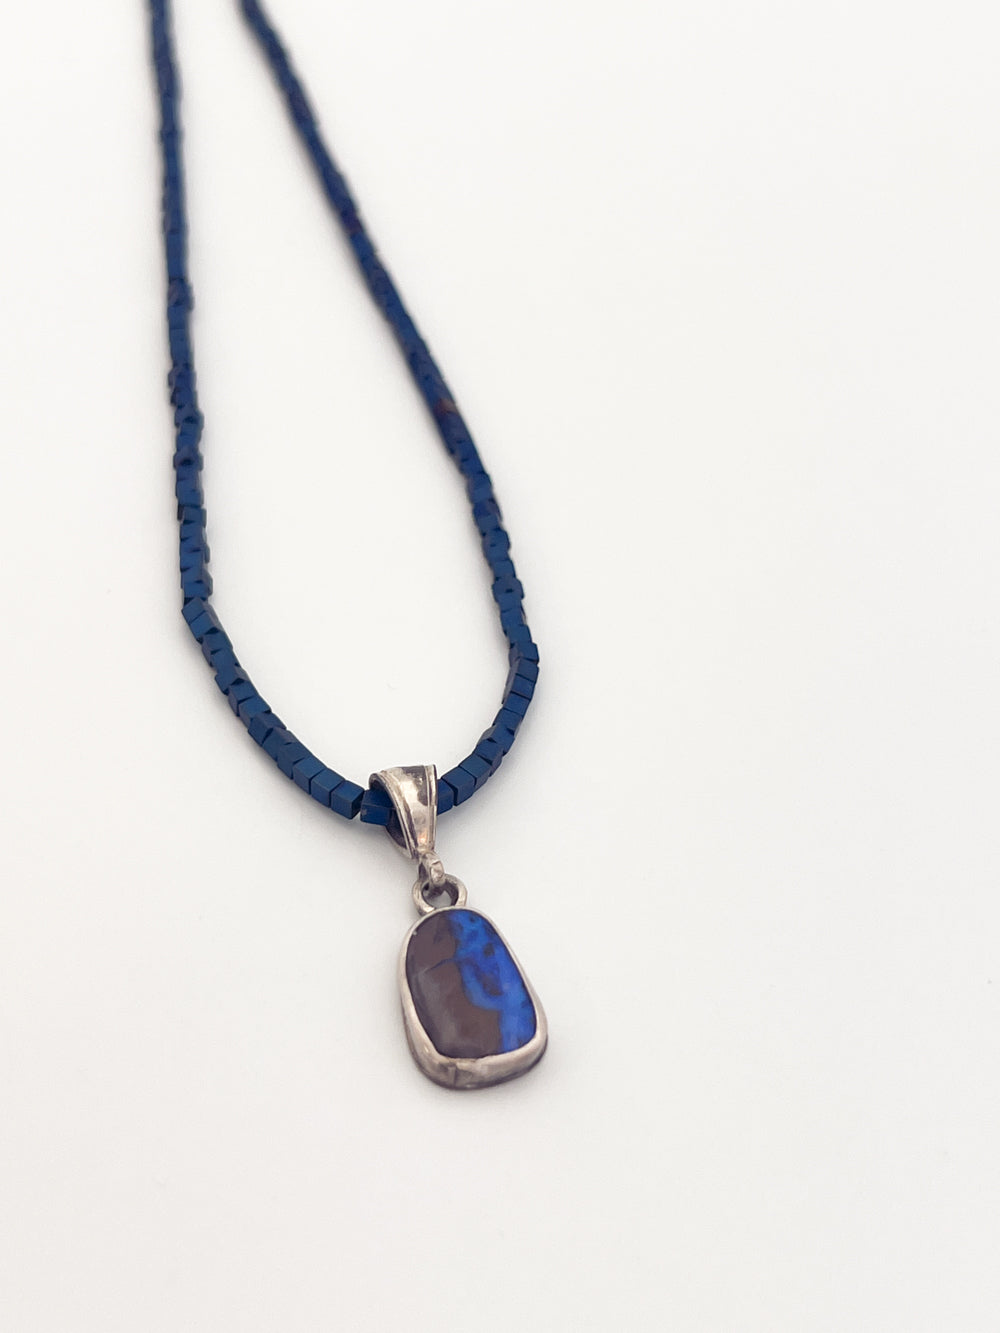 Australian Boulder opal pendant with matching Necklace